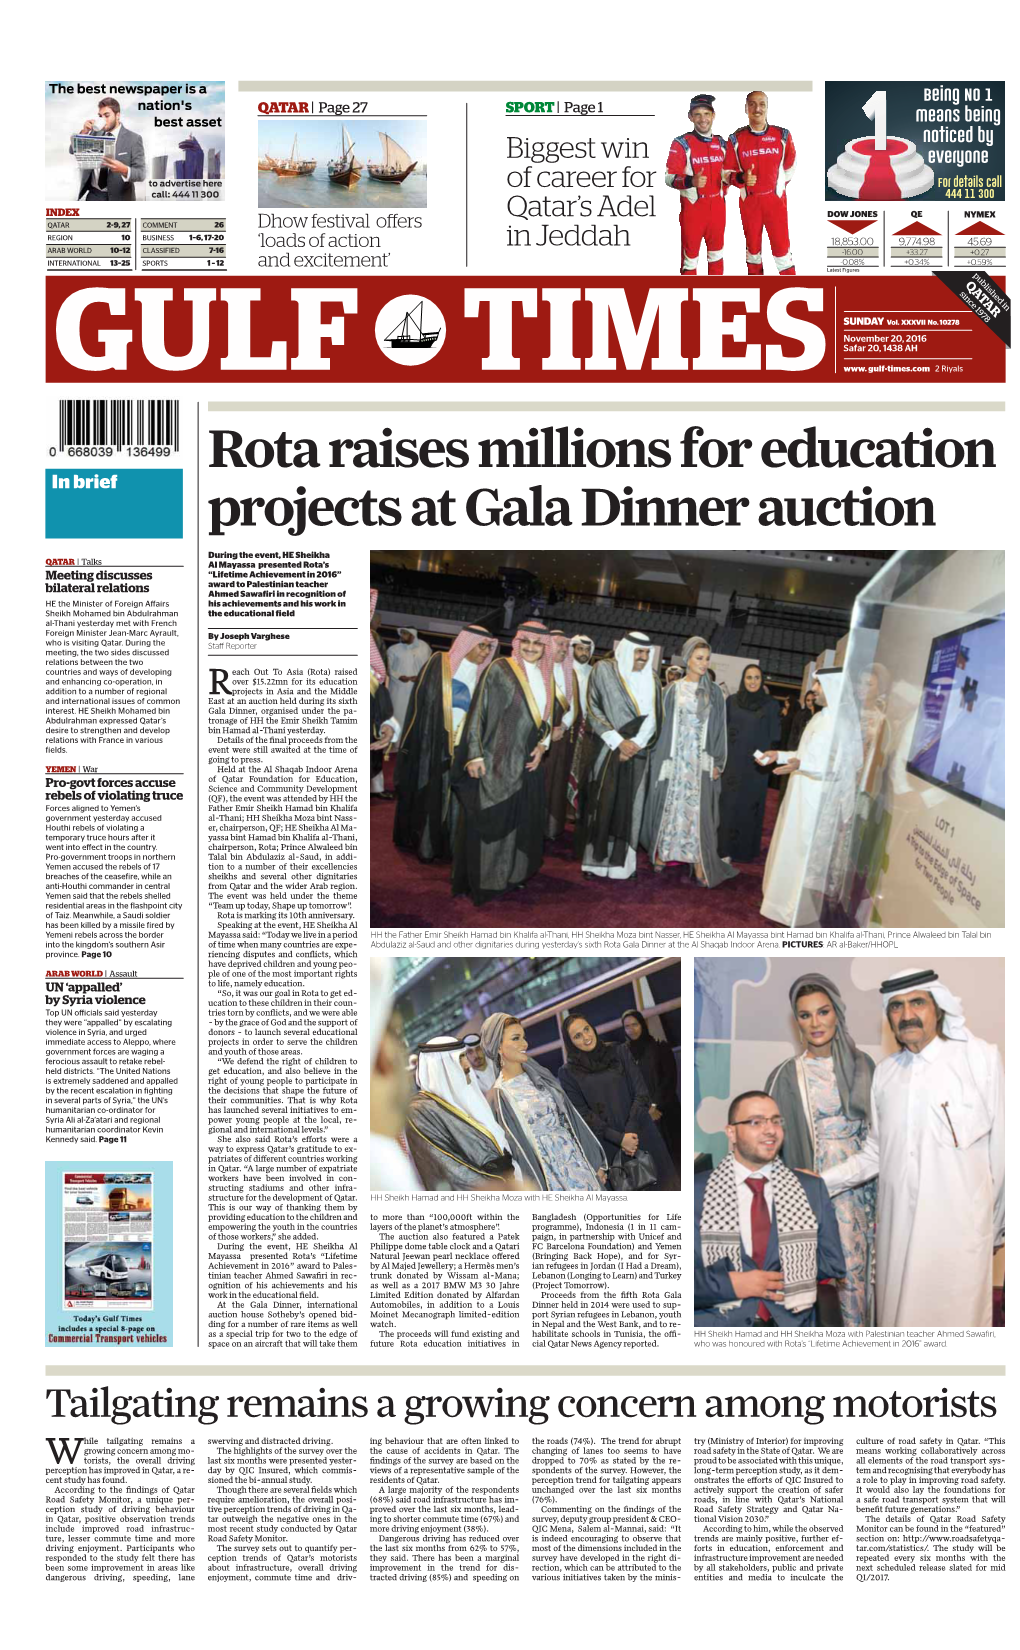 Rota Raises Millions for Education Projects at Gala Dinner Auction